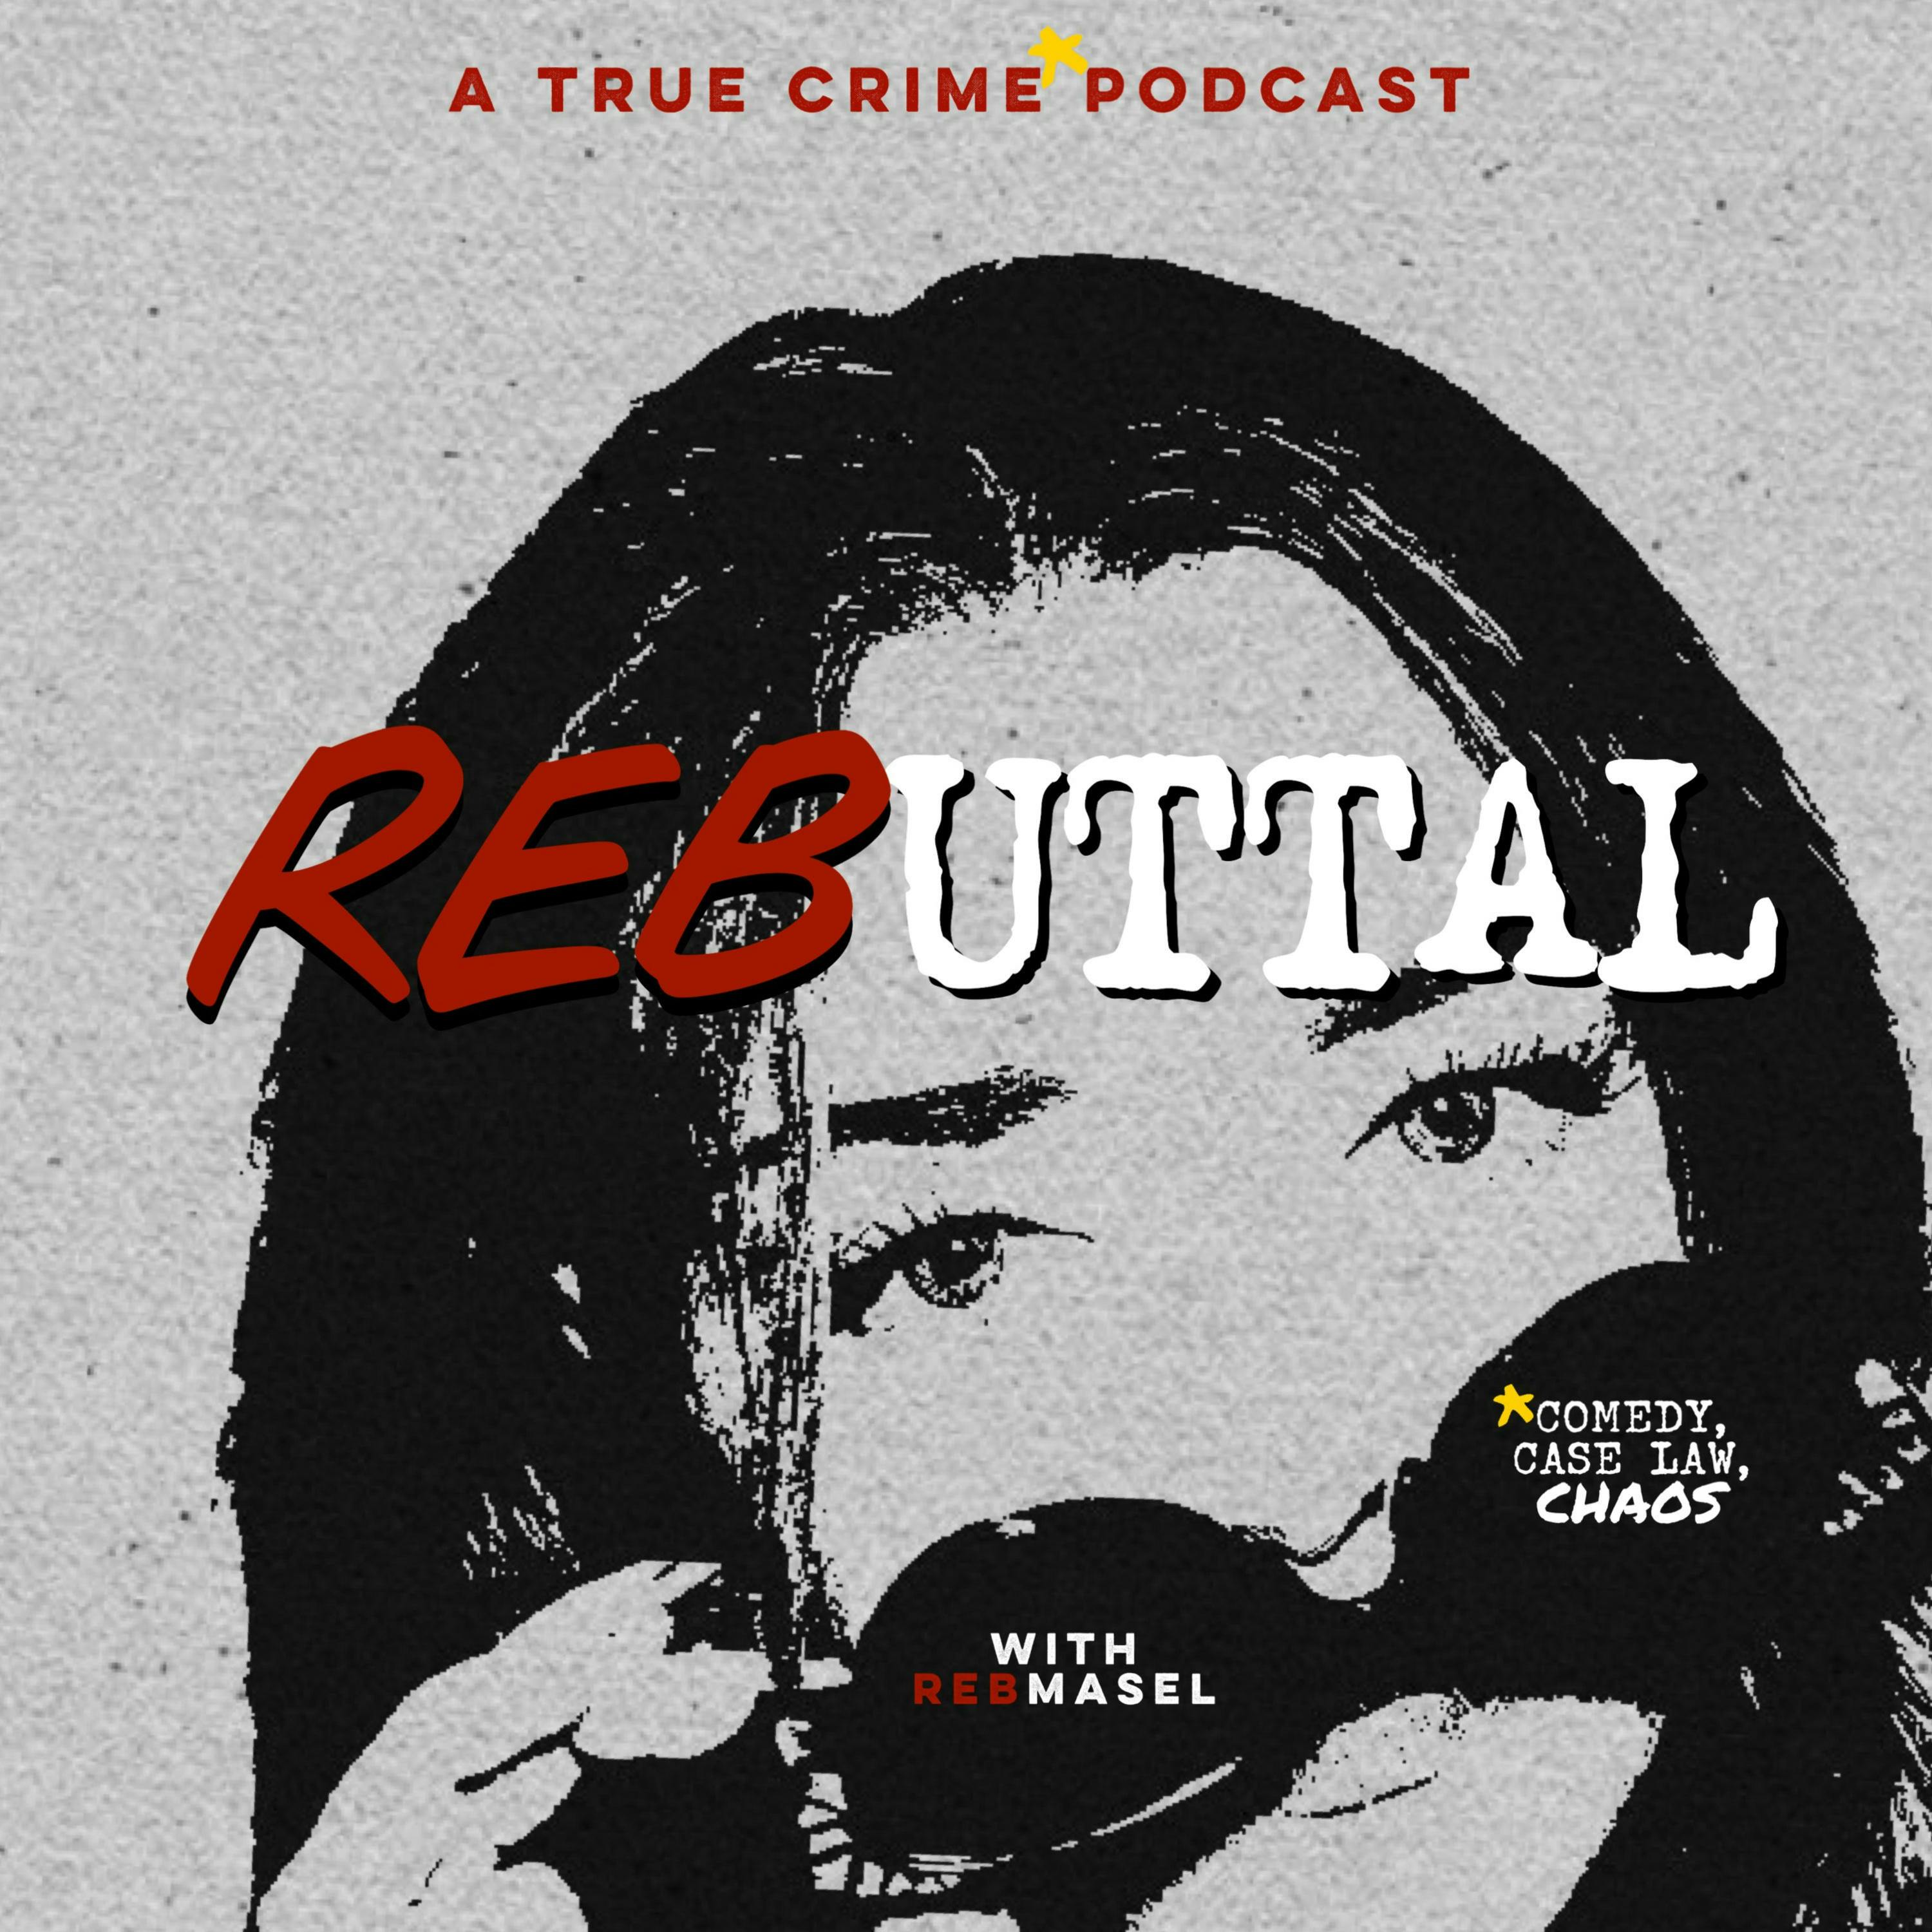 Rebuttal podcast show image